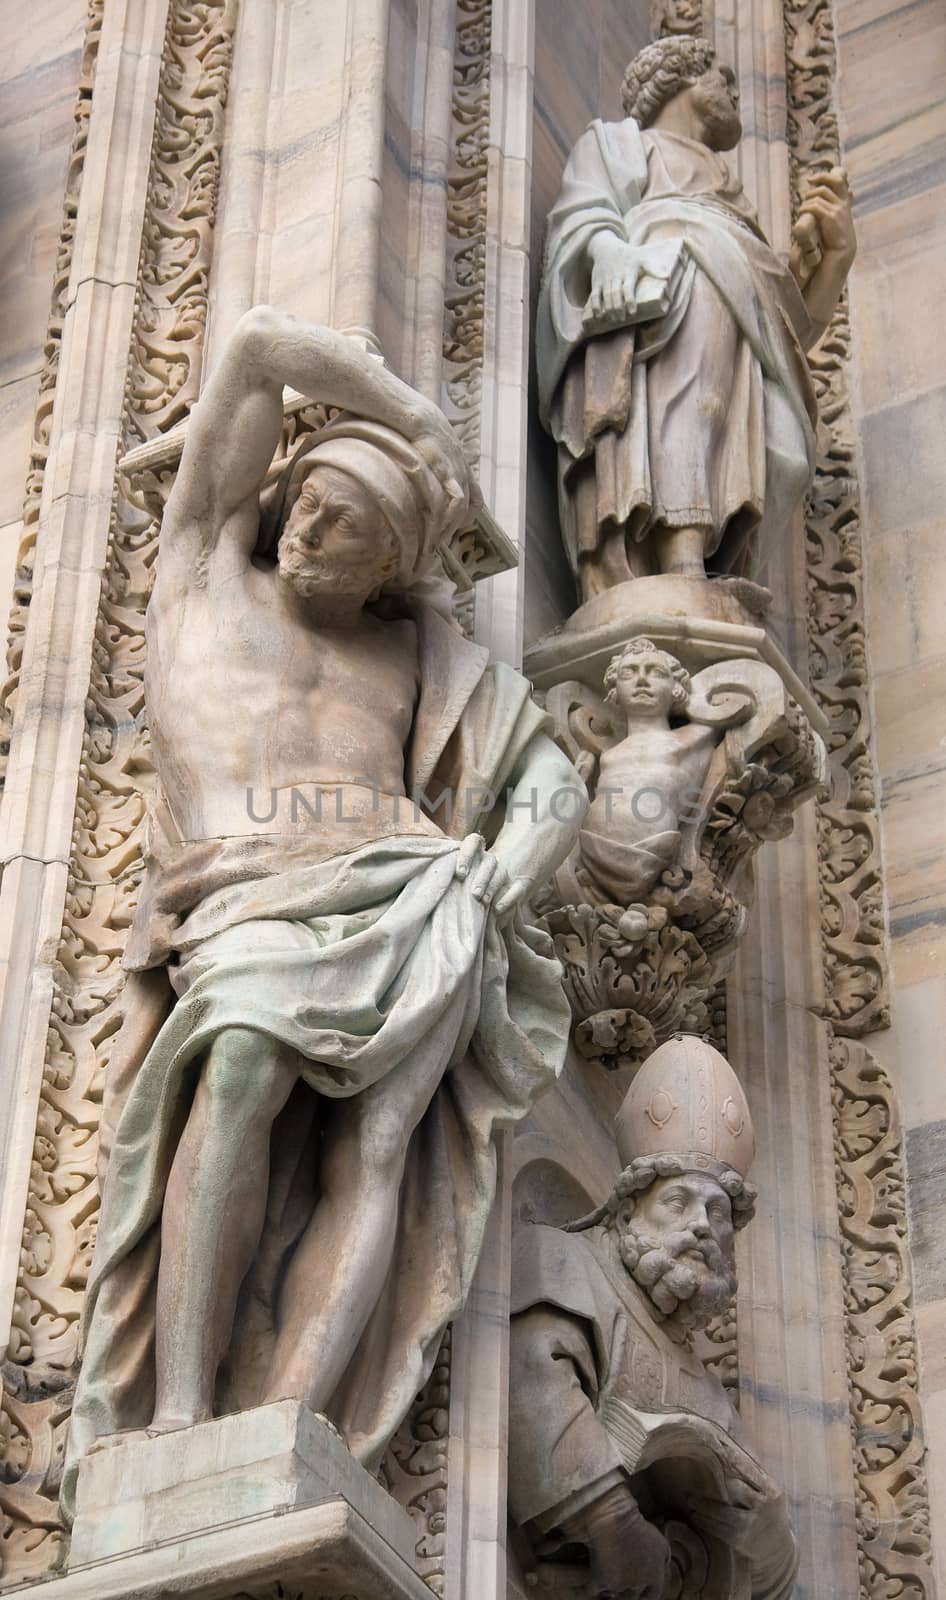 Sculptures on the Duomo, cathedral in Milan, Italy